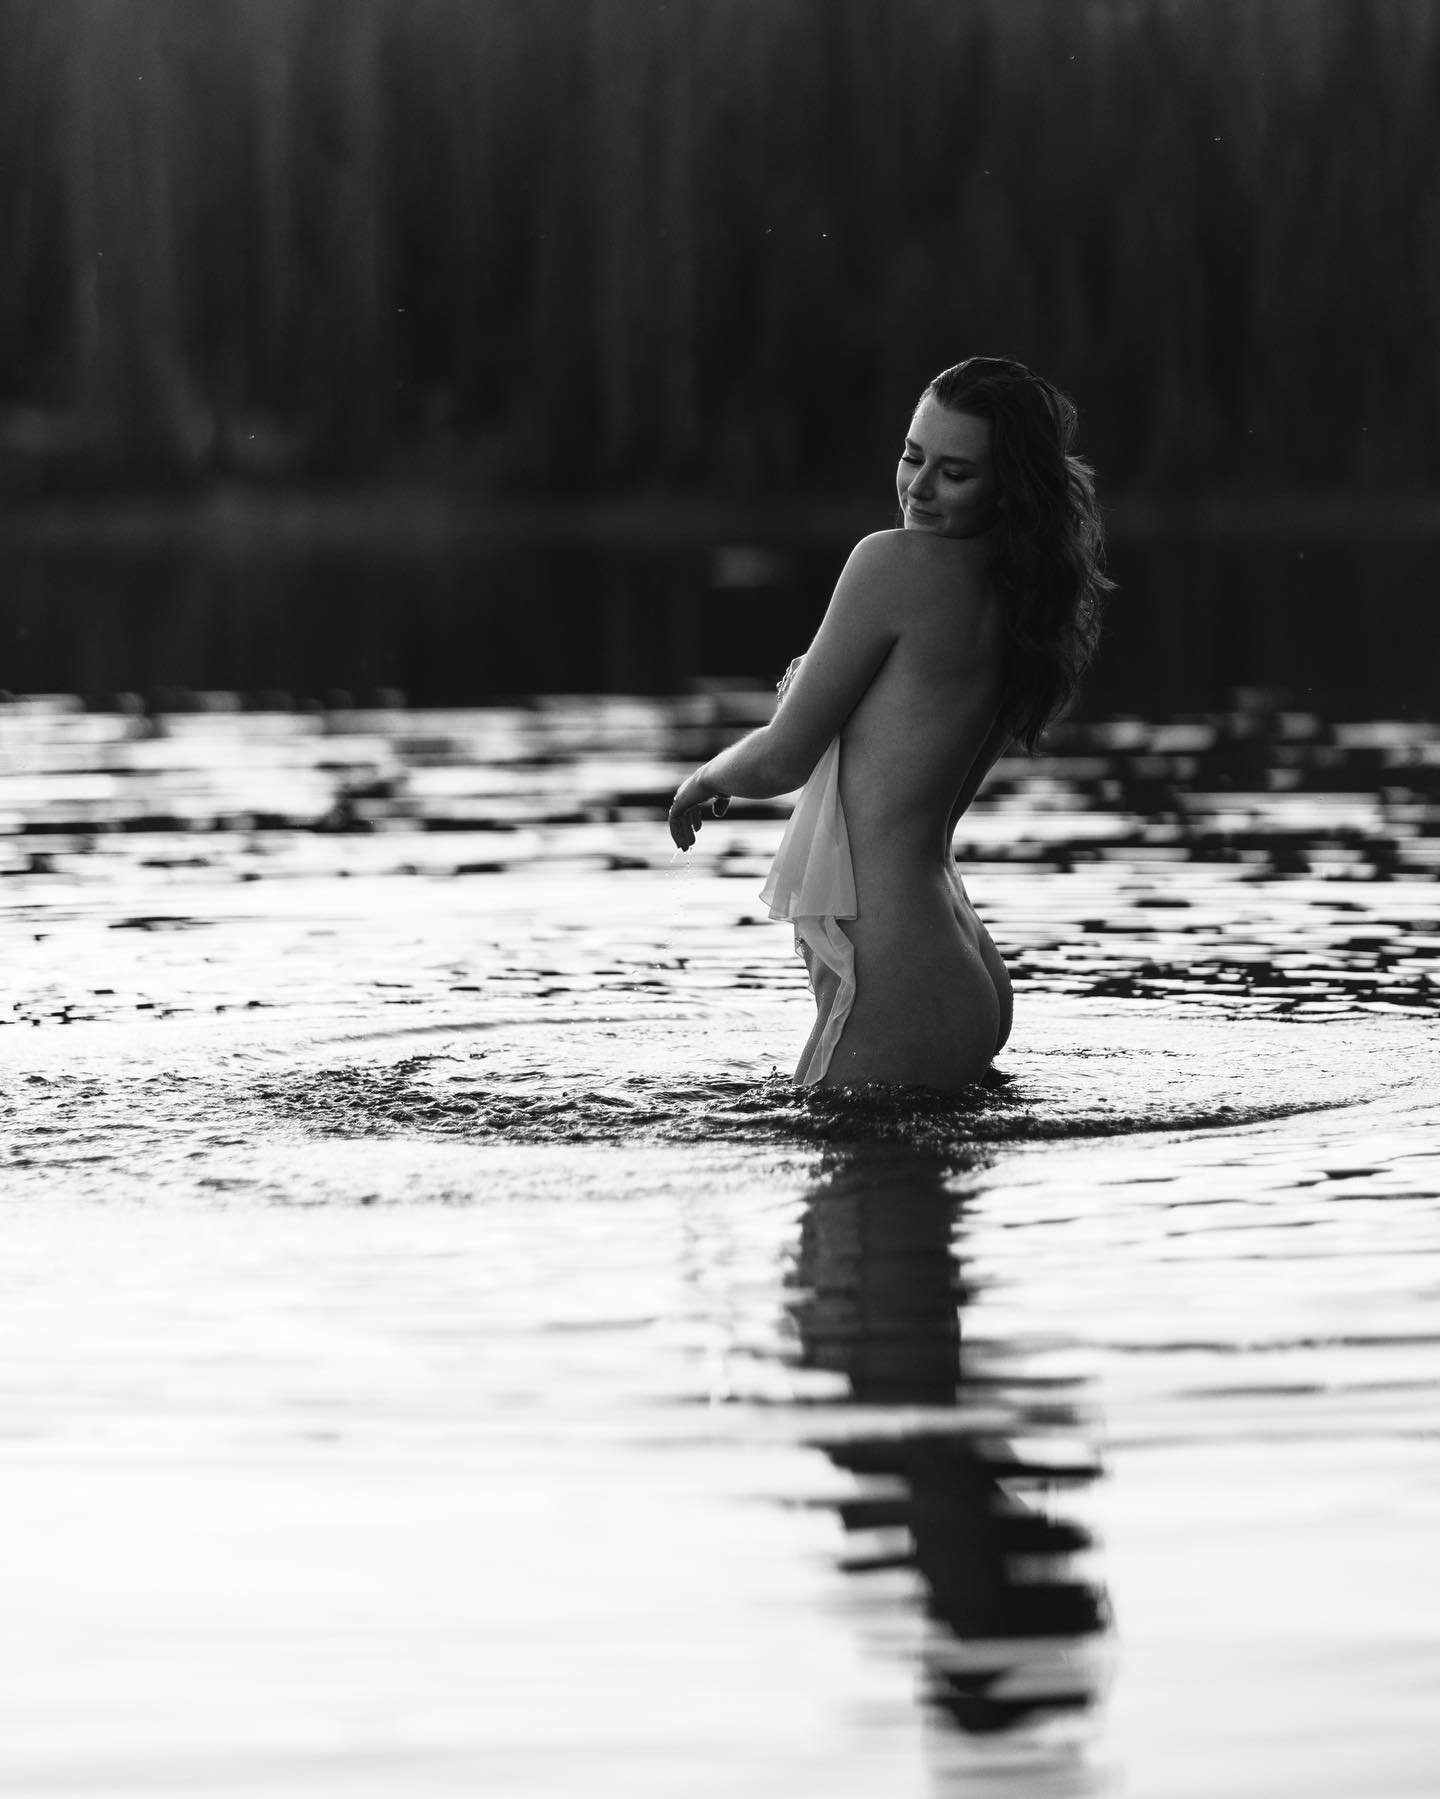 Is it summer time yet?! Can&rsquo;t wait to head up to my favorite lakes this summer! Did you know I only have 5 spots left for Wild Woman Summer Shoots?! Don&rsquo;t wait to book your Lake shoot with us for 2023! It&rsquo;s an unforgettable experien